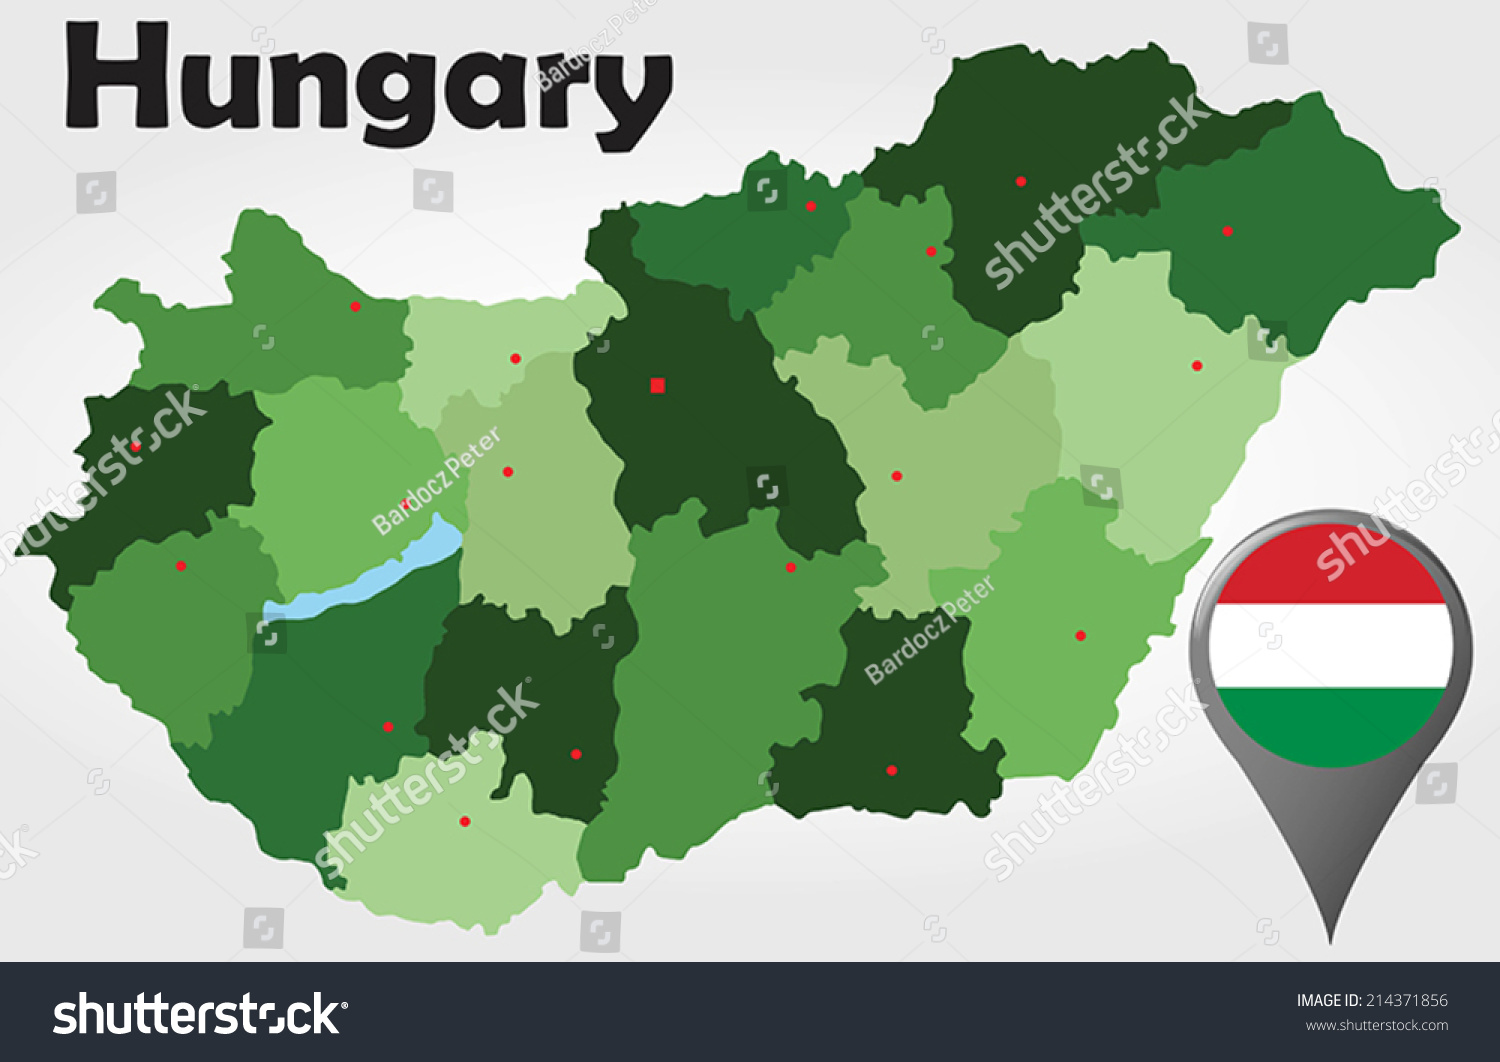 Hungary political map with green shades and map pointer. #214371856